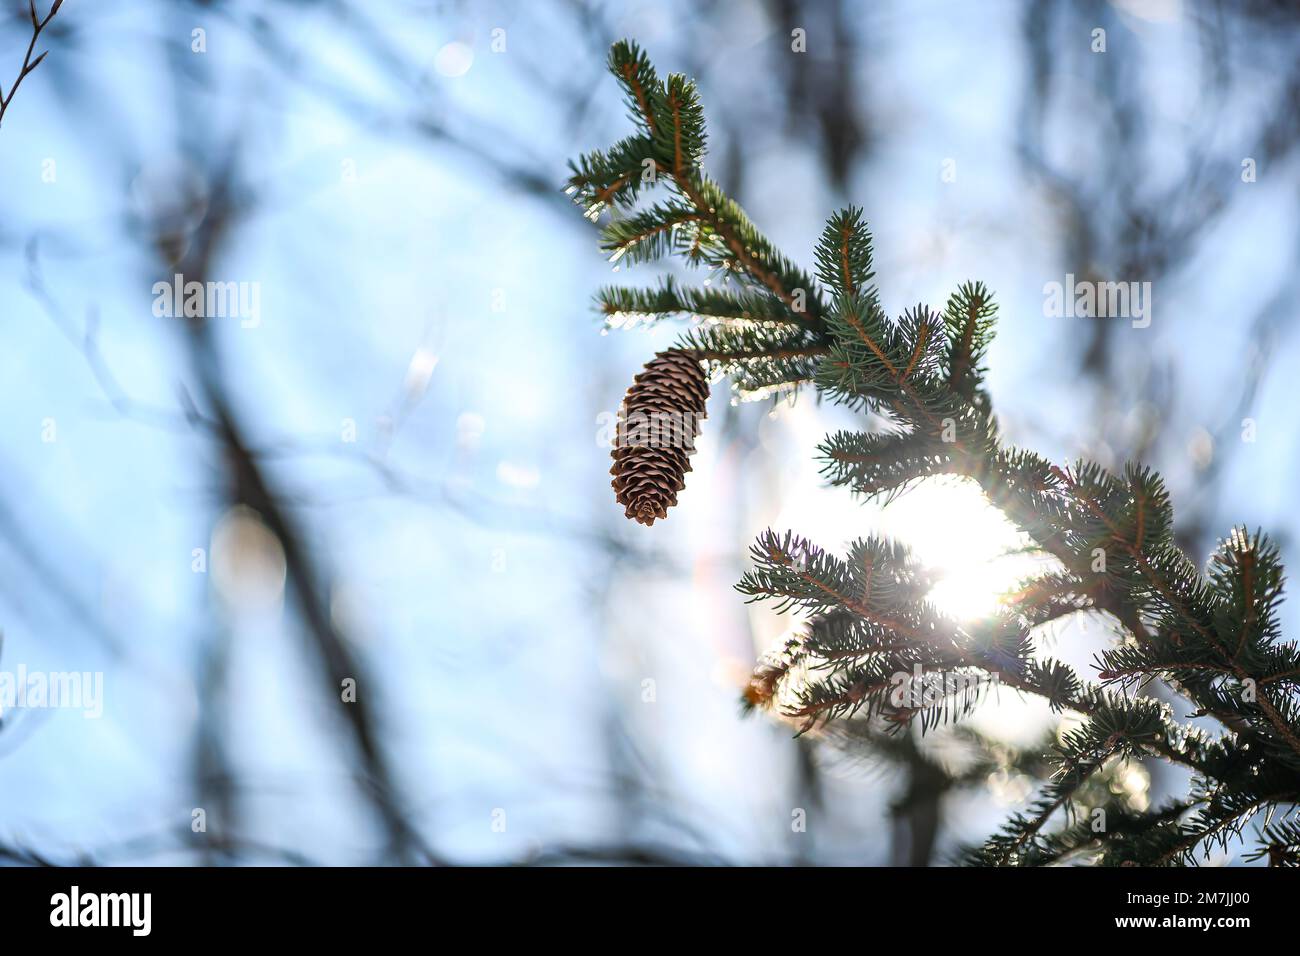 Looking up into a Pine tree, with pine cone, with blue sky between the branches Stock Photo